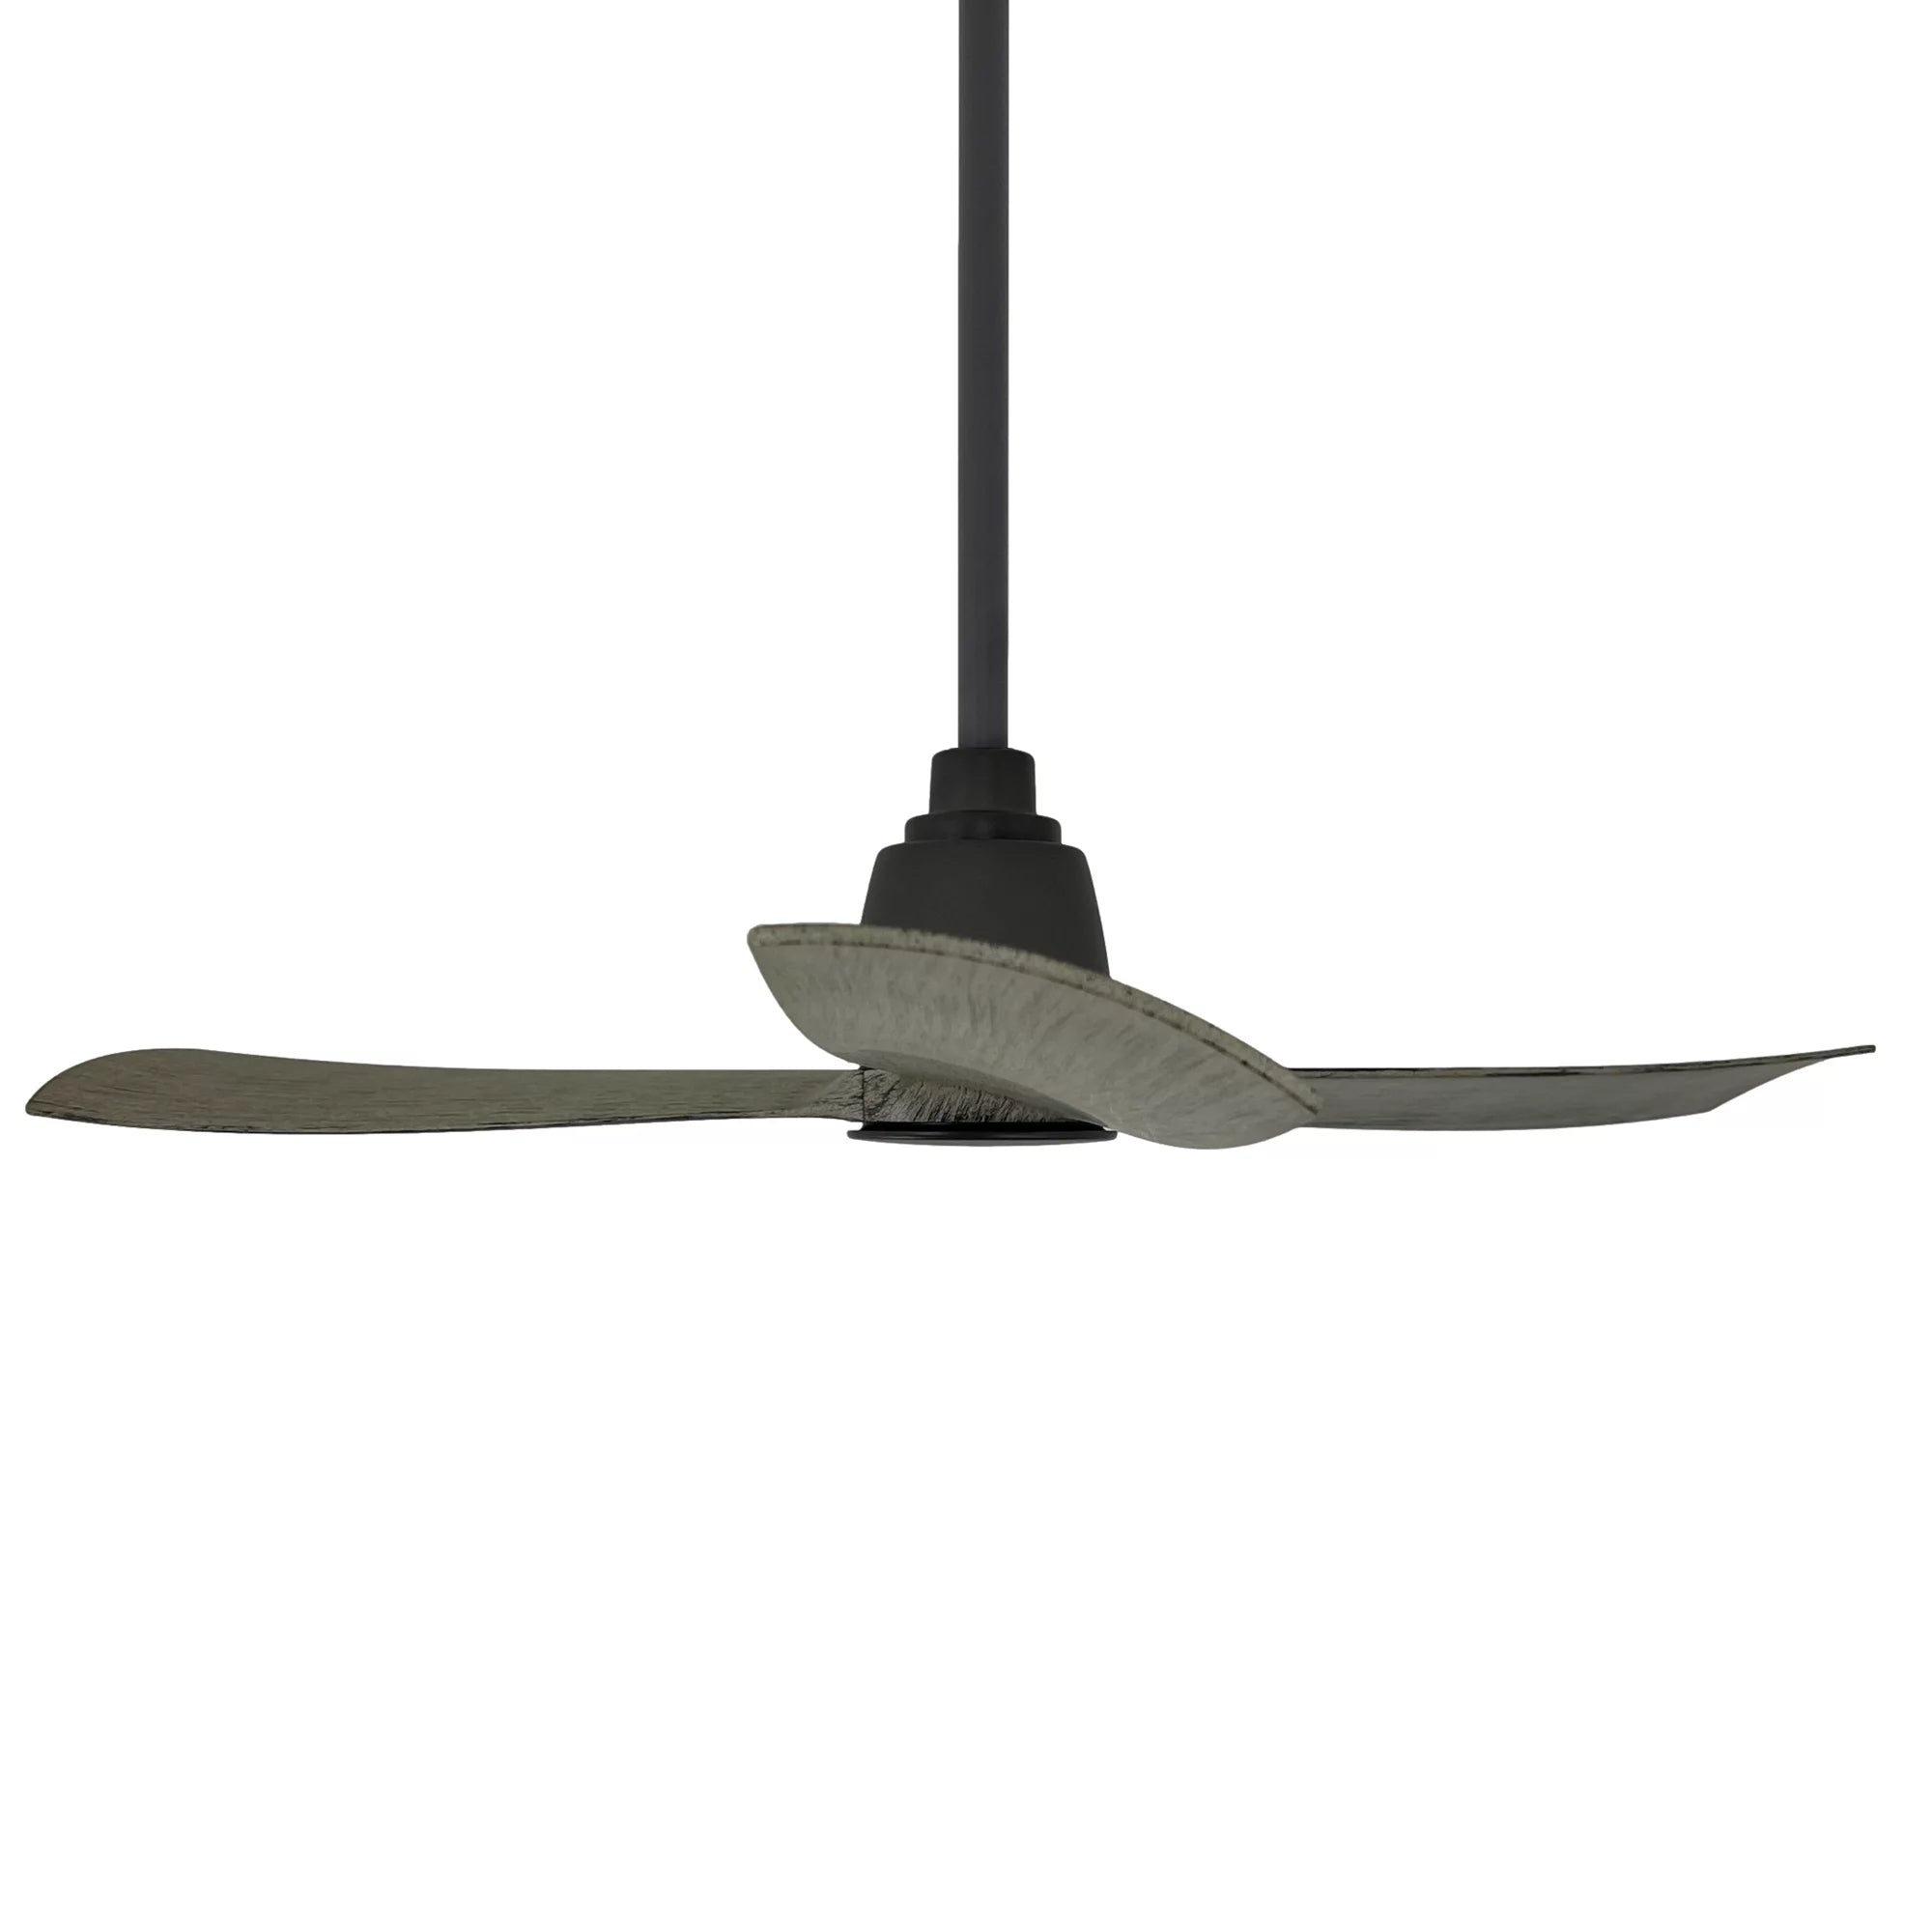 360Fans Kute 52″ (132cm) Graphite/Weathered Wood 3 Blade DC Ceiling Fan & Remote Control